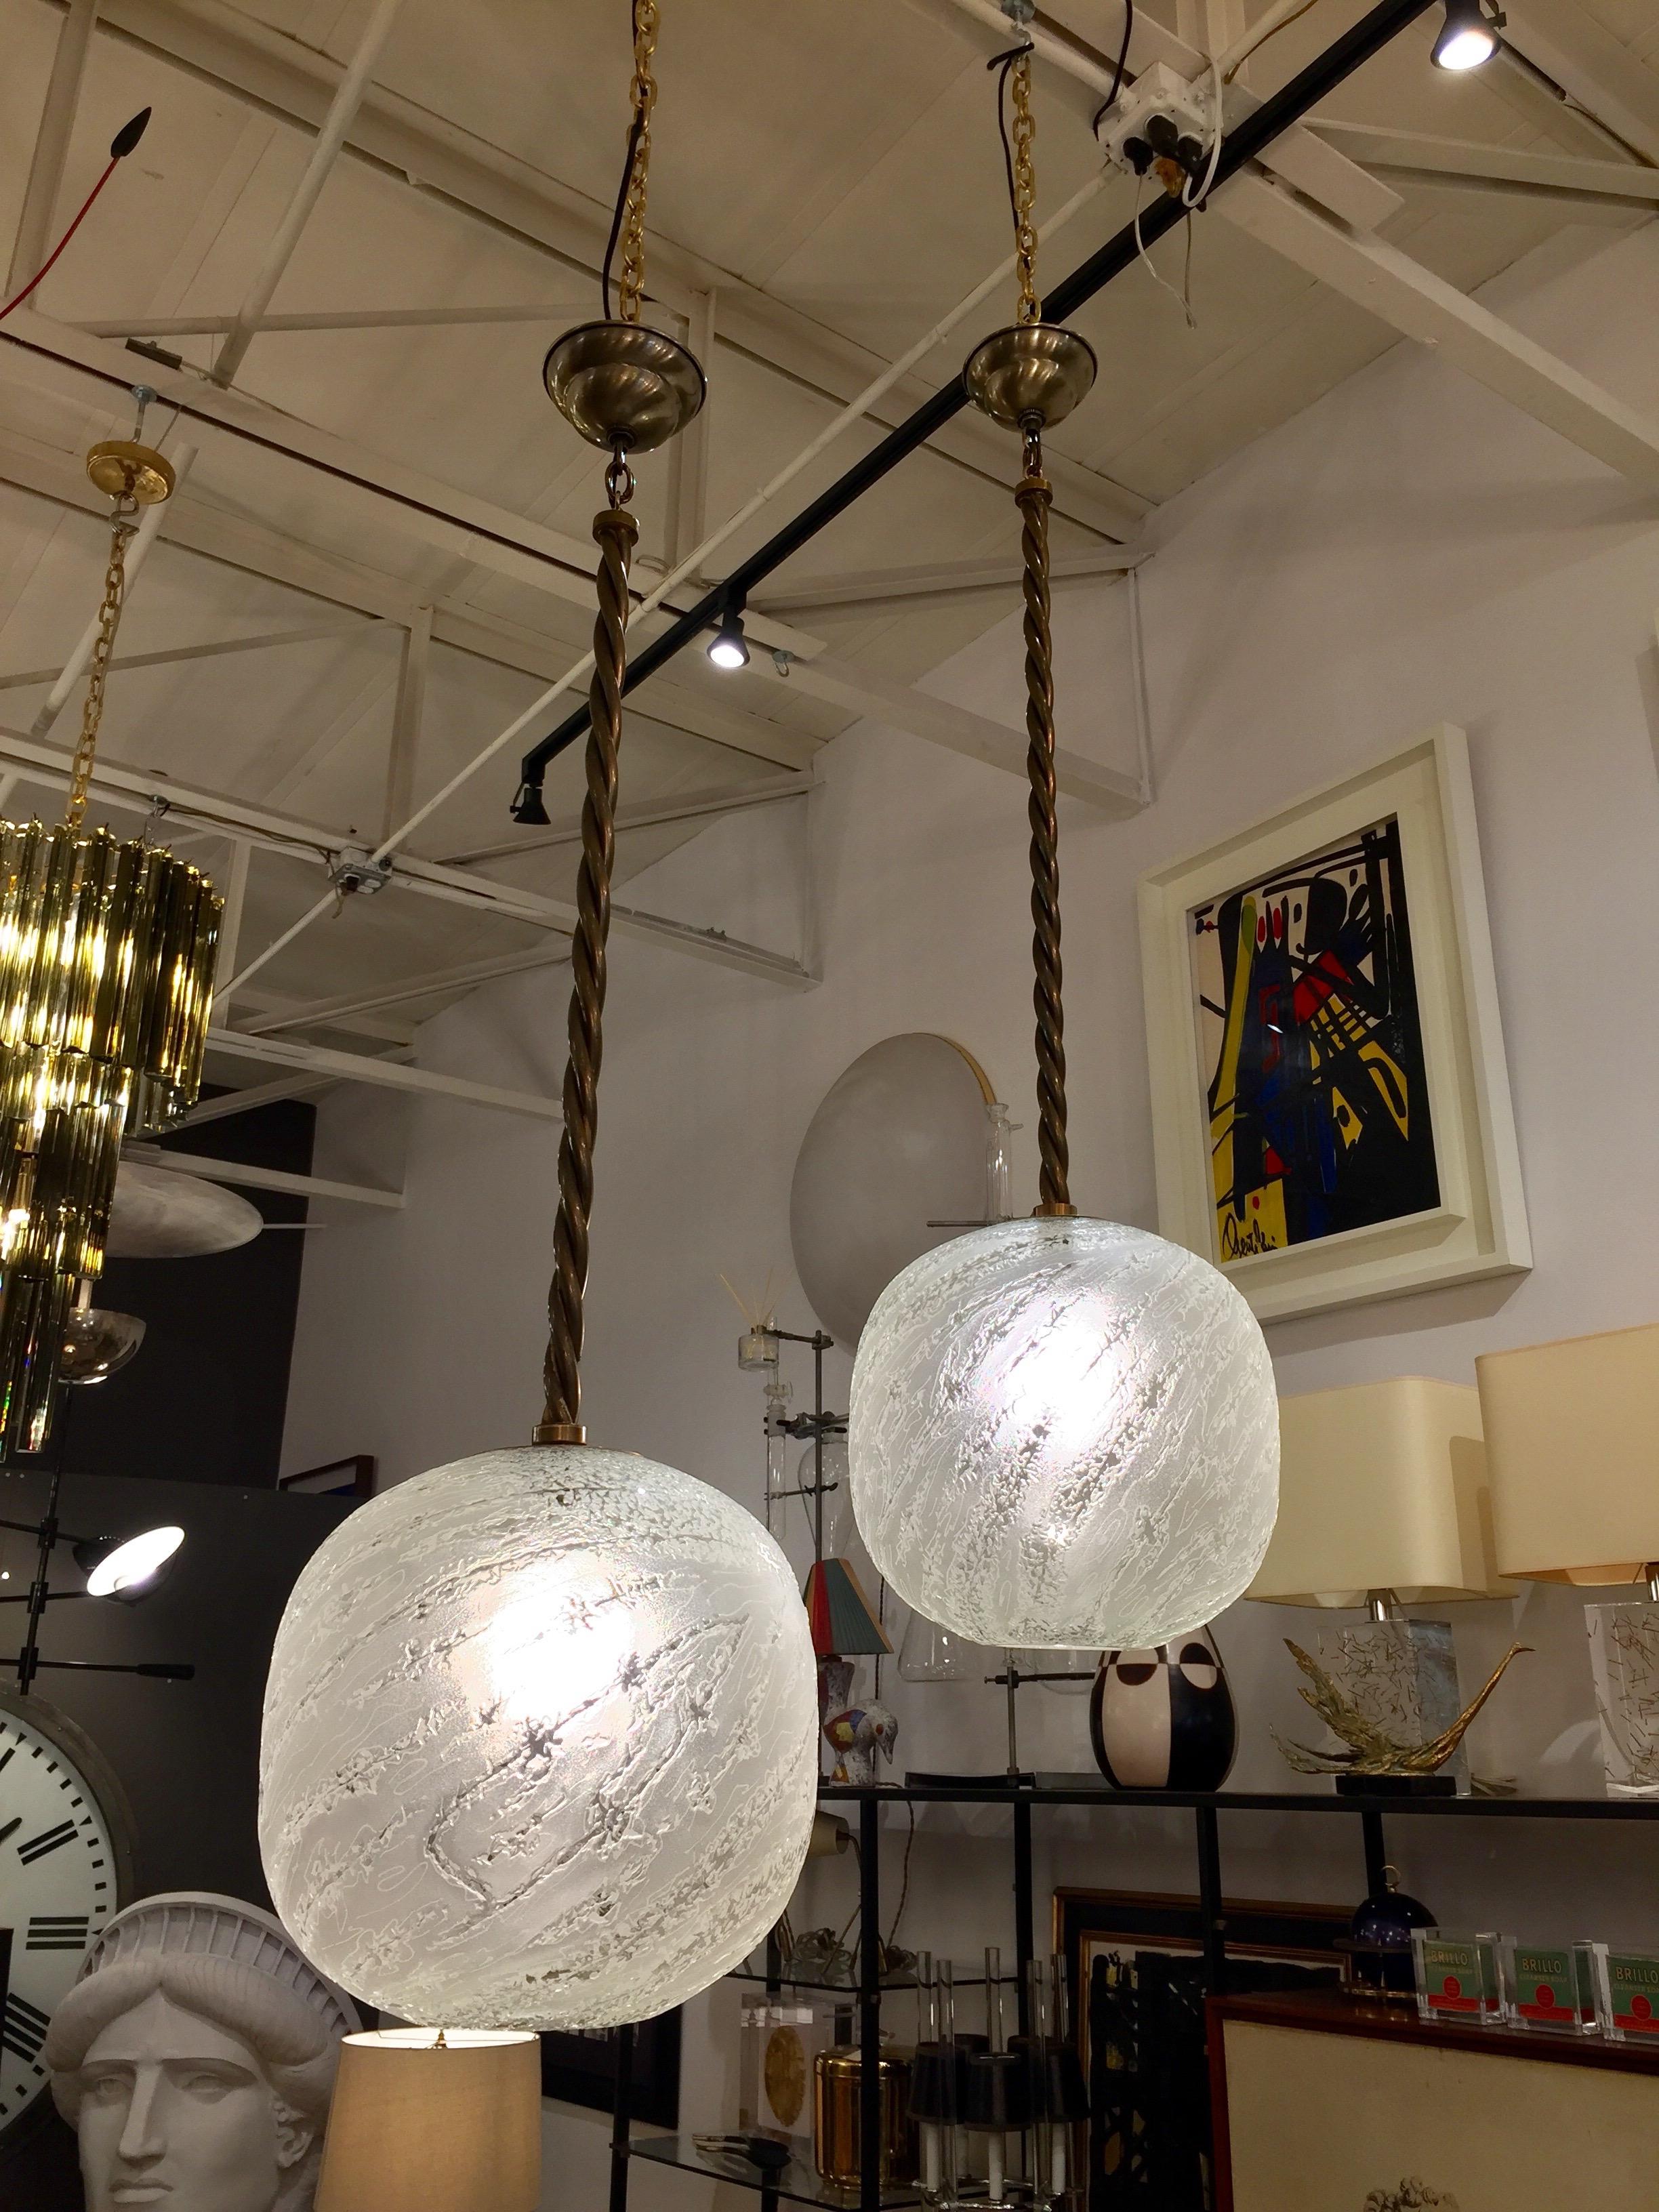 This Murano glass globe pendant light has thickly etched frosted glass and beautiful finish work at opening. Original twisted brass rod and canopy.